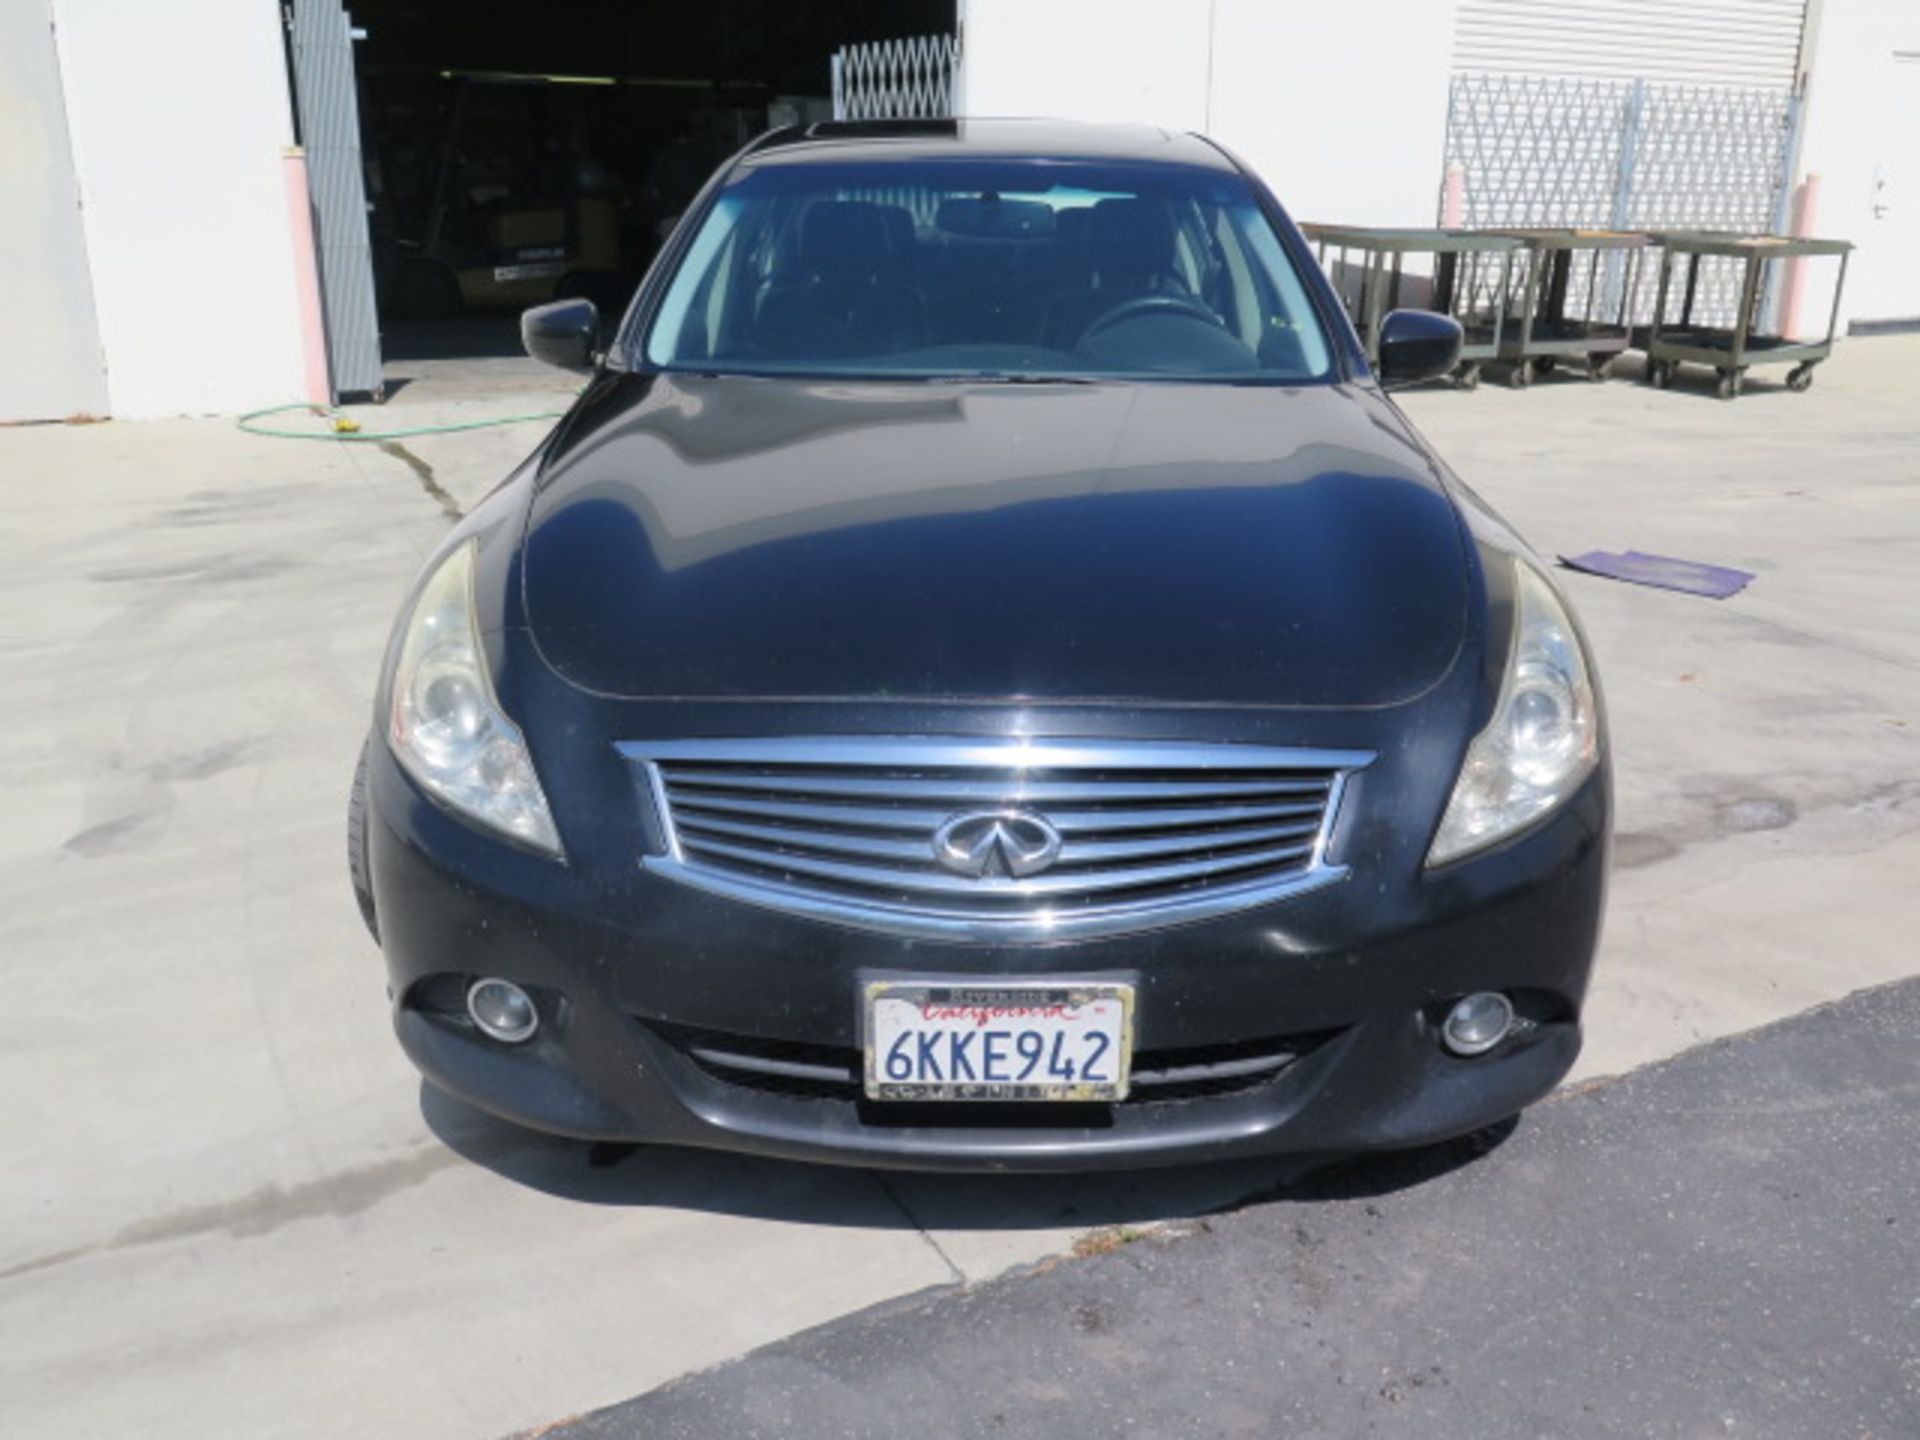 2010 Infinity G37 Lisc# 6KKE924 w/ Rebuilt Gas Engine, Automatic Trans, AC, 133K Miles, SOLD AS IS - Image 2 of 27